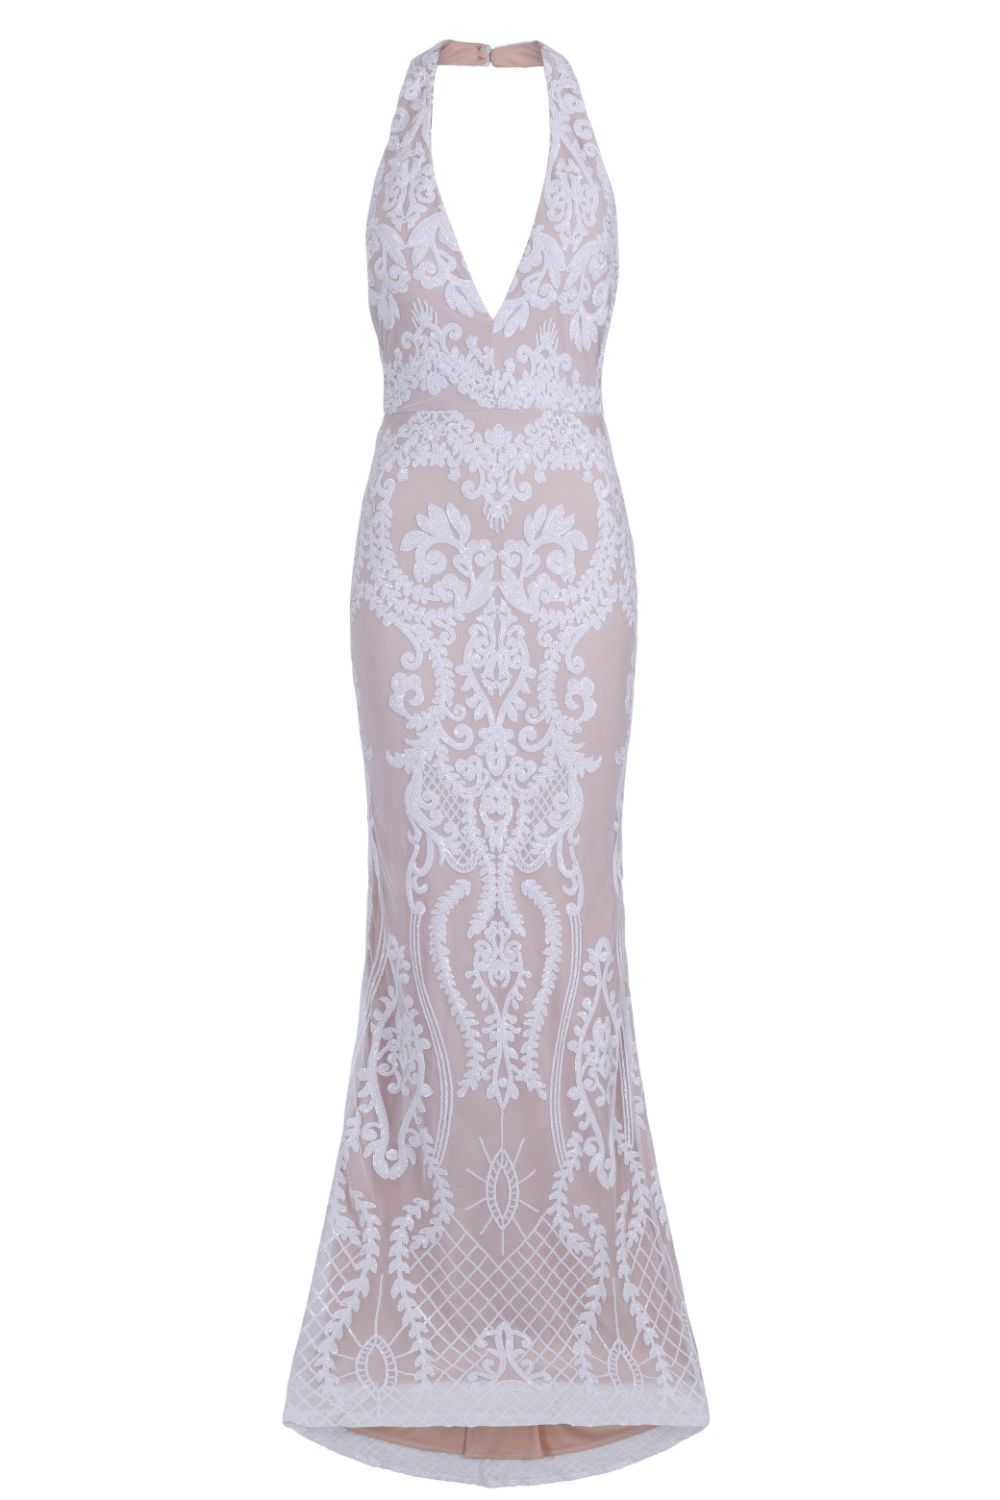 Flora White Luxe Deep Plunge Tie Side Floral Lace Sequin Embellished Maxi  Dress by Nazz Collection